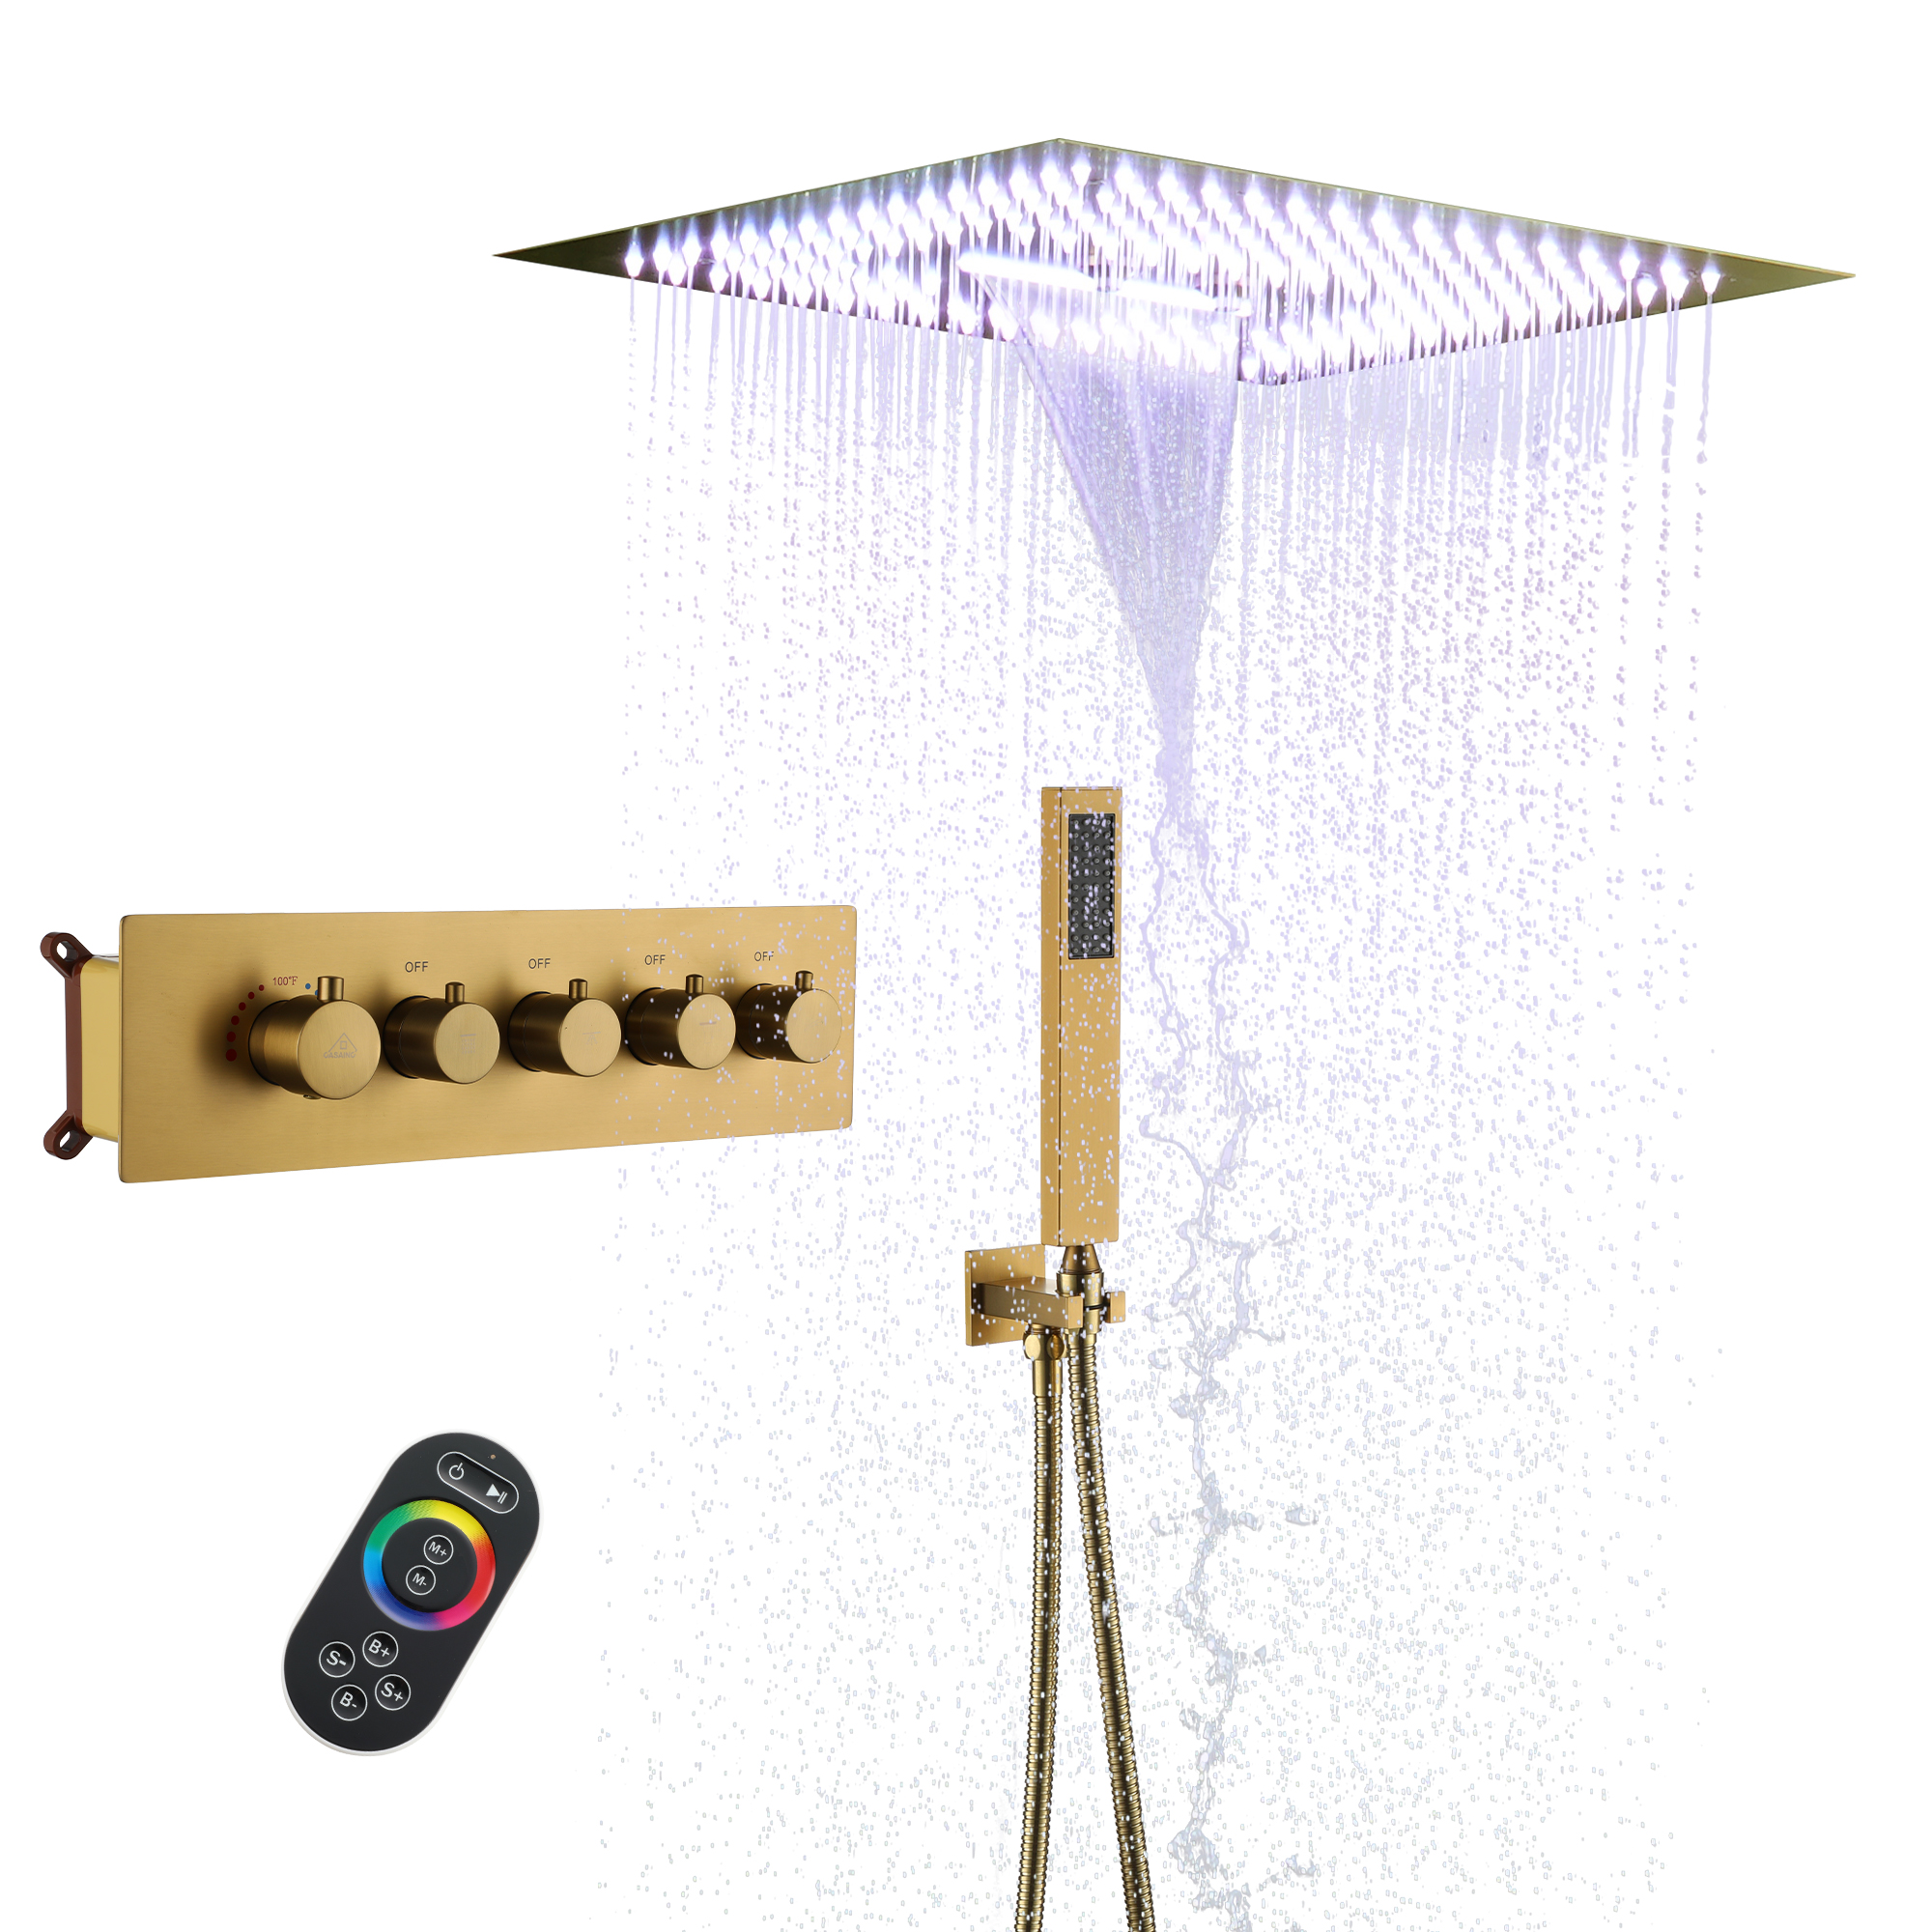 Luxury 4 Functions (Rainfall, Waterfall, Misty, Handheld) Shower System,16 Inch Thermostatic Rain Shower Set with Multi-Function Remote Control 64 Color Lights